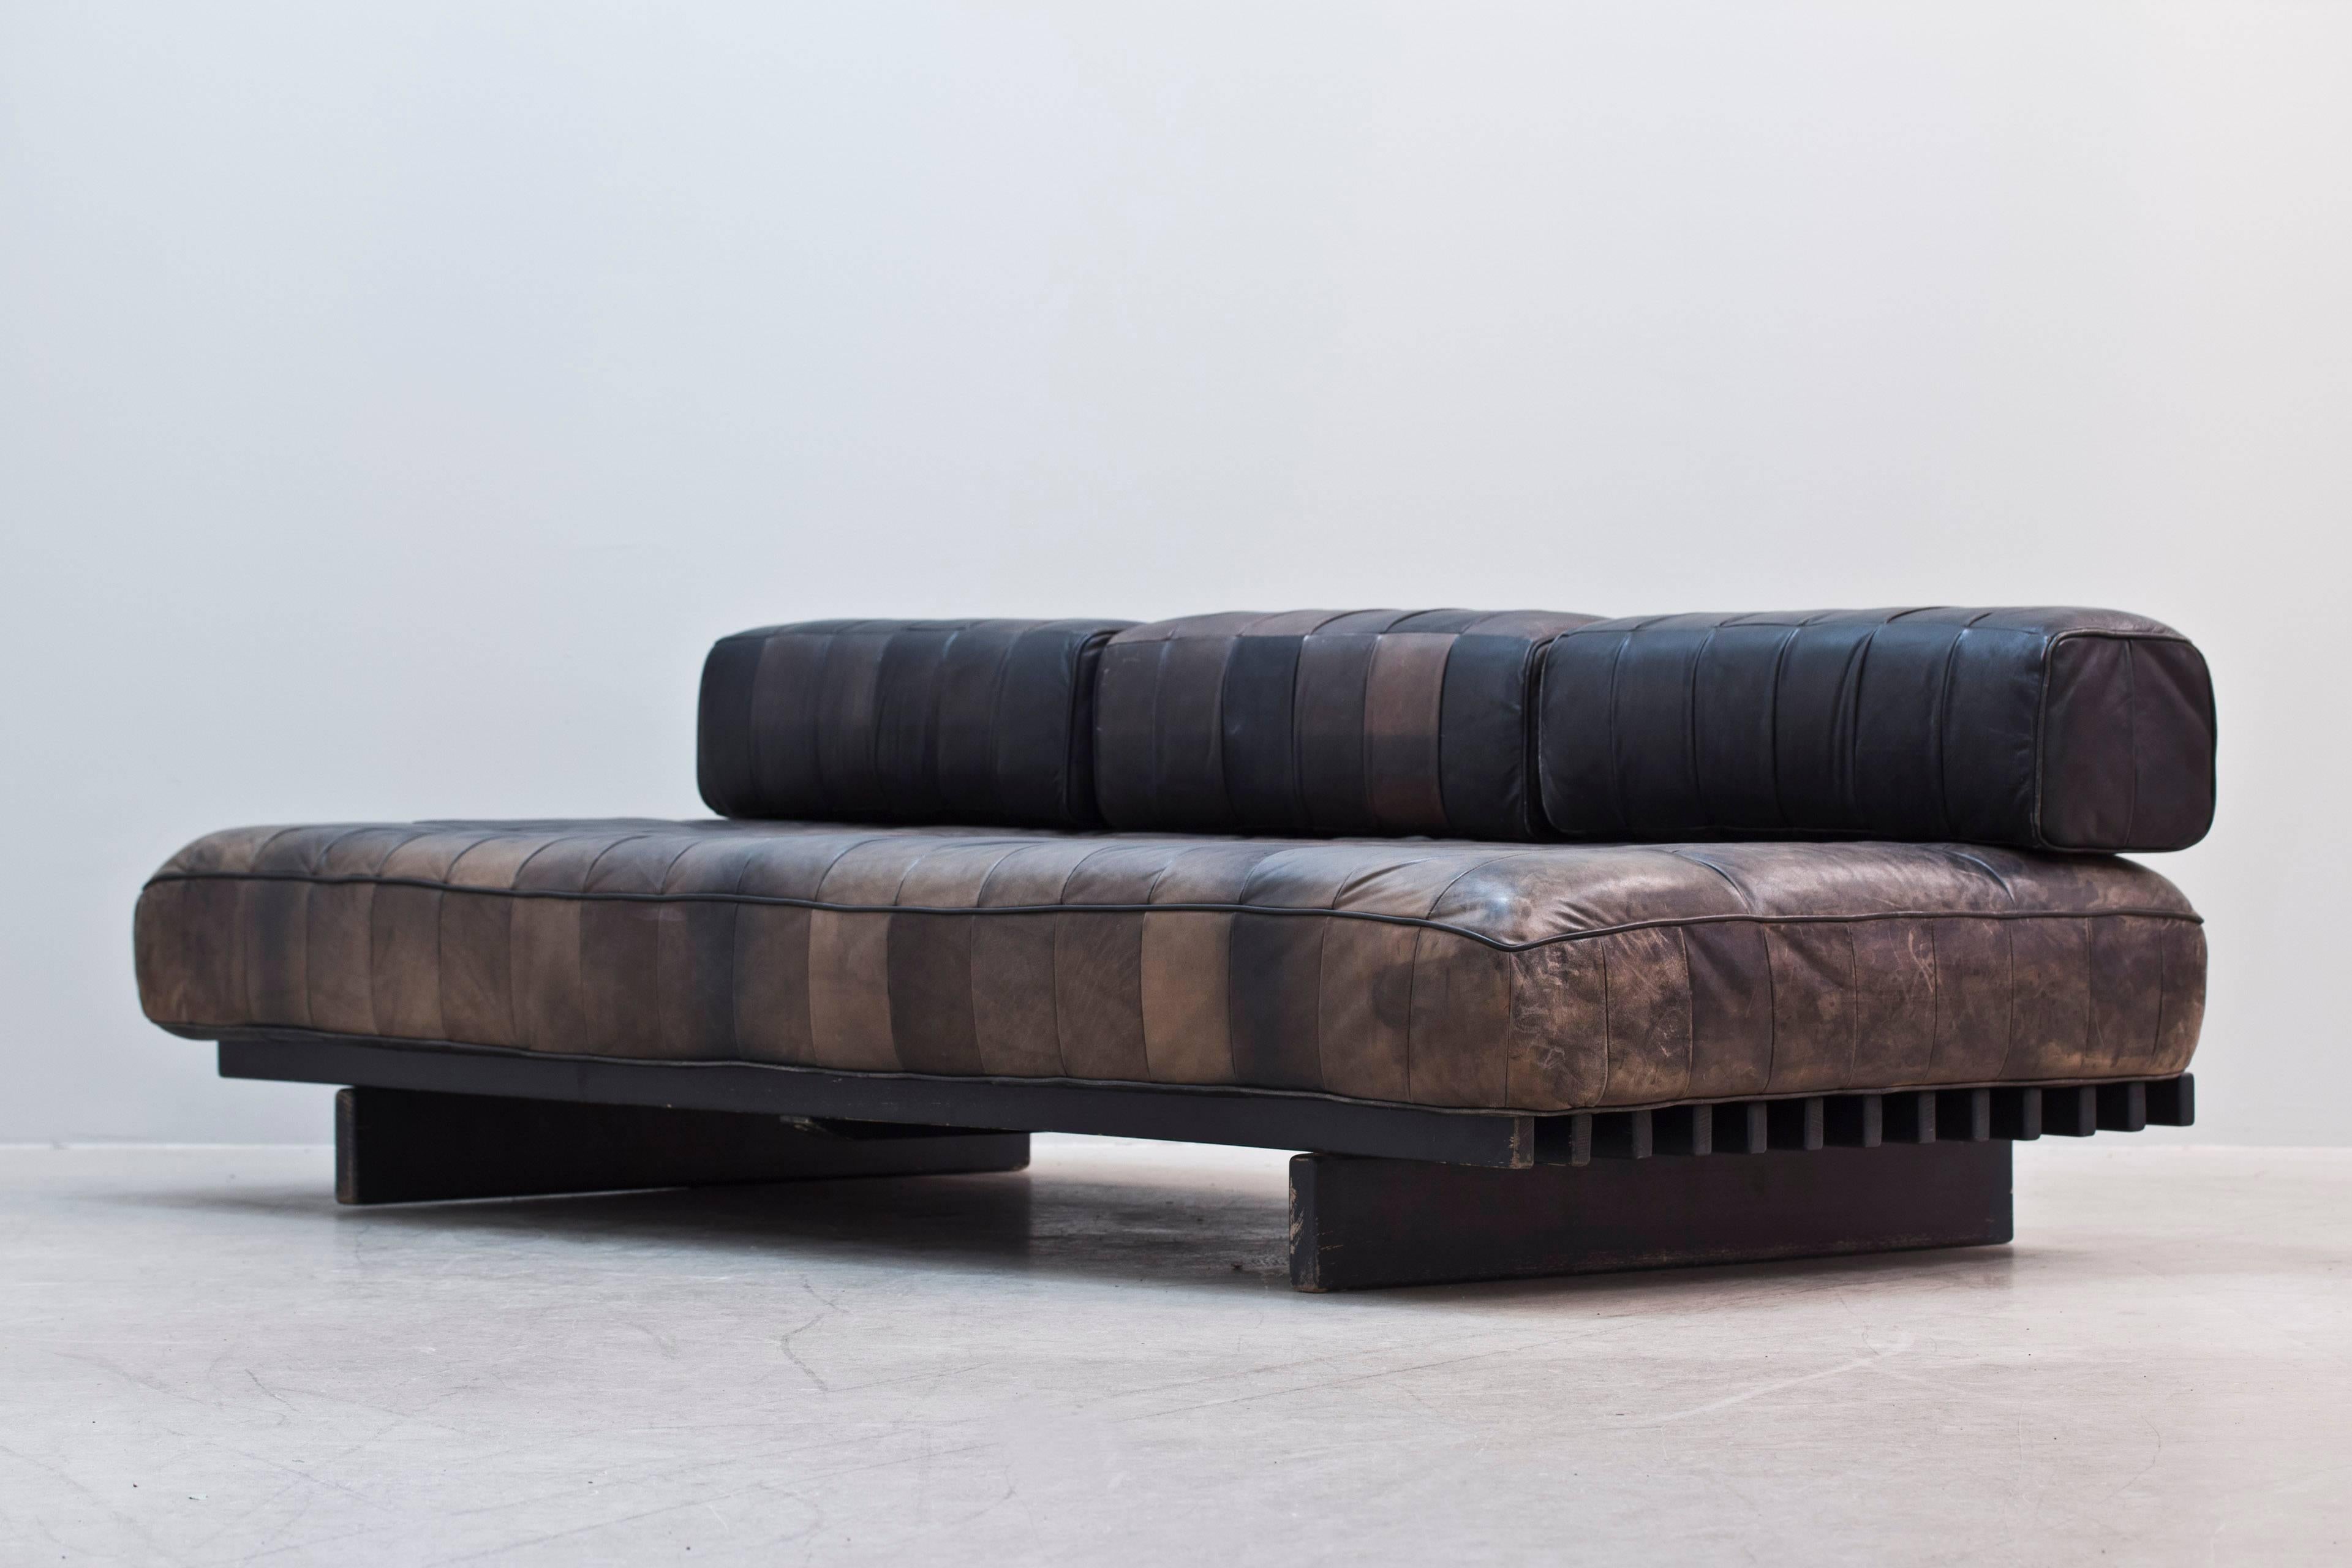 Patchwork brown leather daybed designed by De Sede in 1970s, Switzerland.
Black wood frame, loose mattress, three cushions covered in brown leather removable back support. 